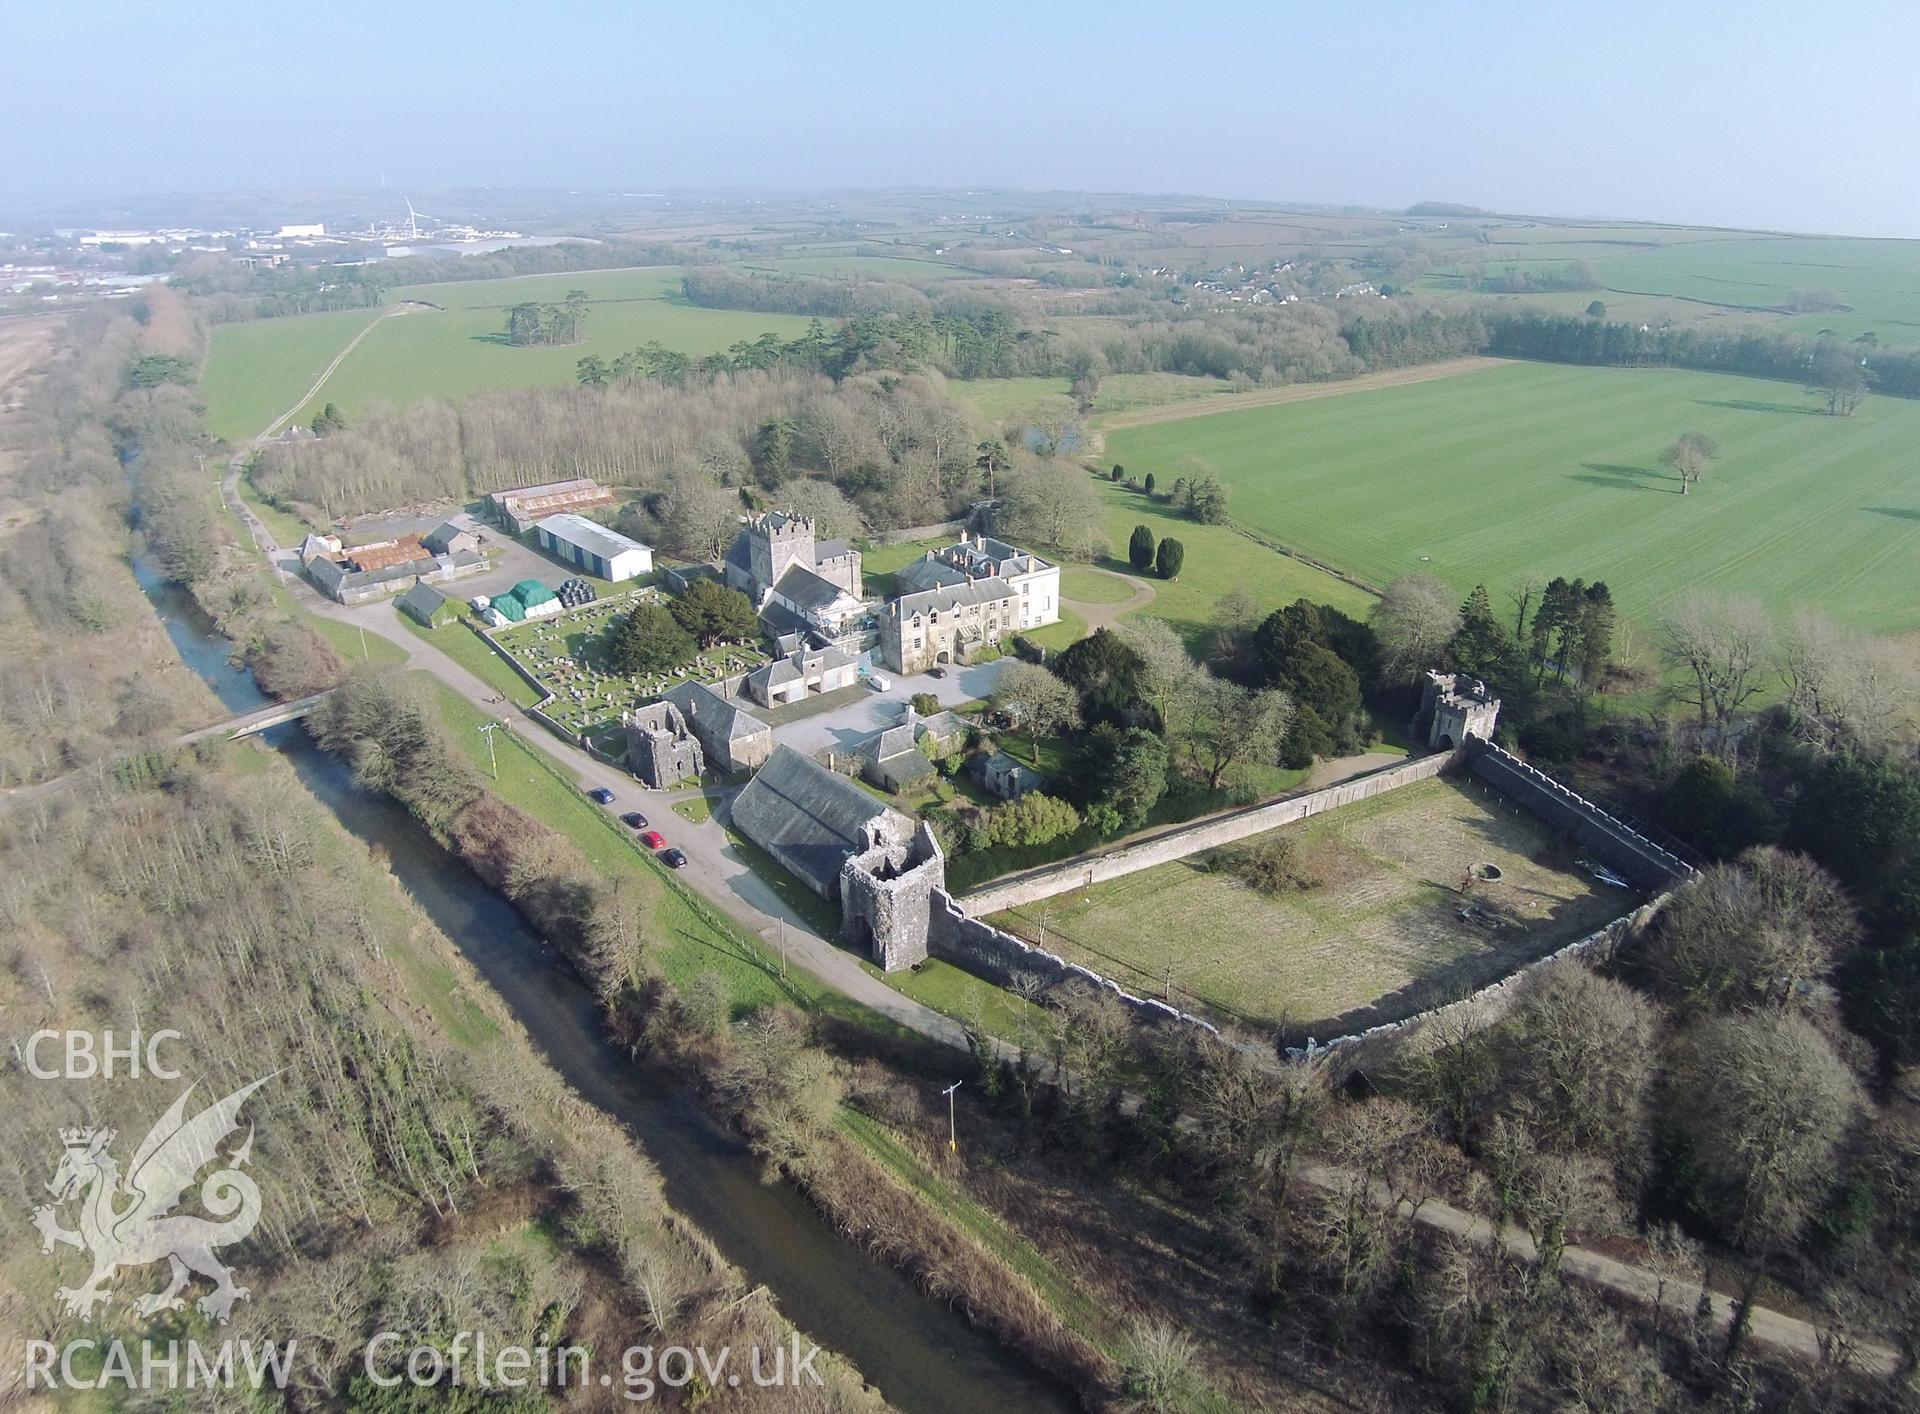 Colour aerial photo showing Ewenny Priory, taken by Paul R. Davis, 13th April 2016.